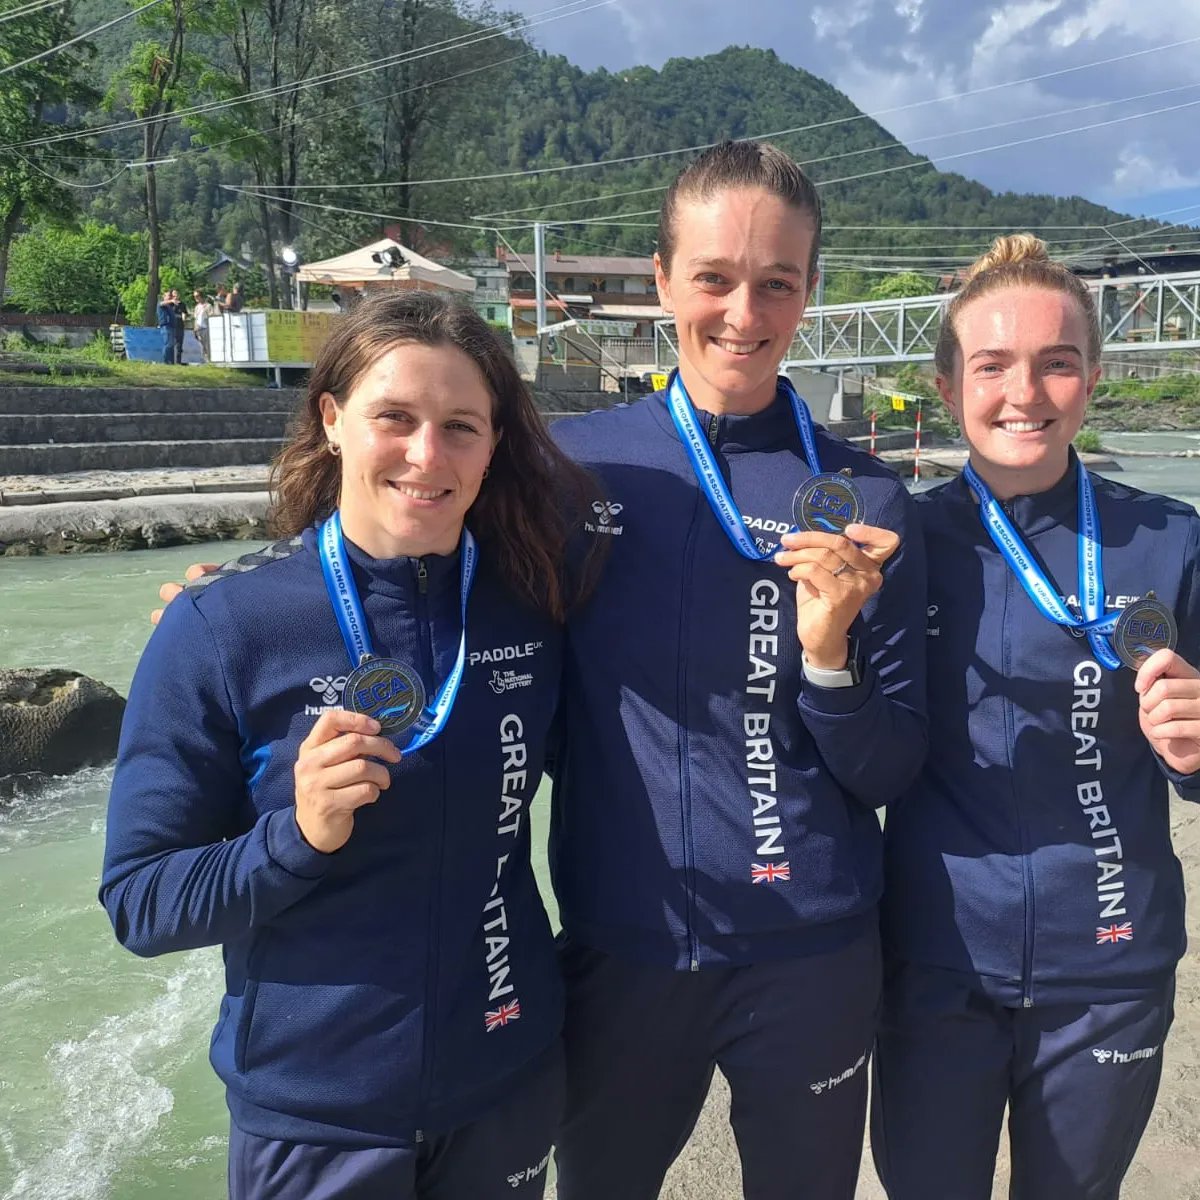 GB conclude the Canoe Europe Slalom Championships with bronze in the women's C1 team event. Read more about the final days racing here paddleuk.org.uk/c1-team-bronze…